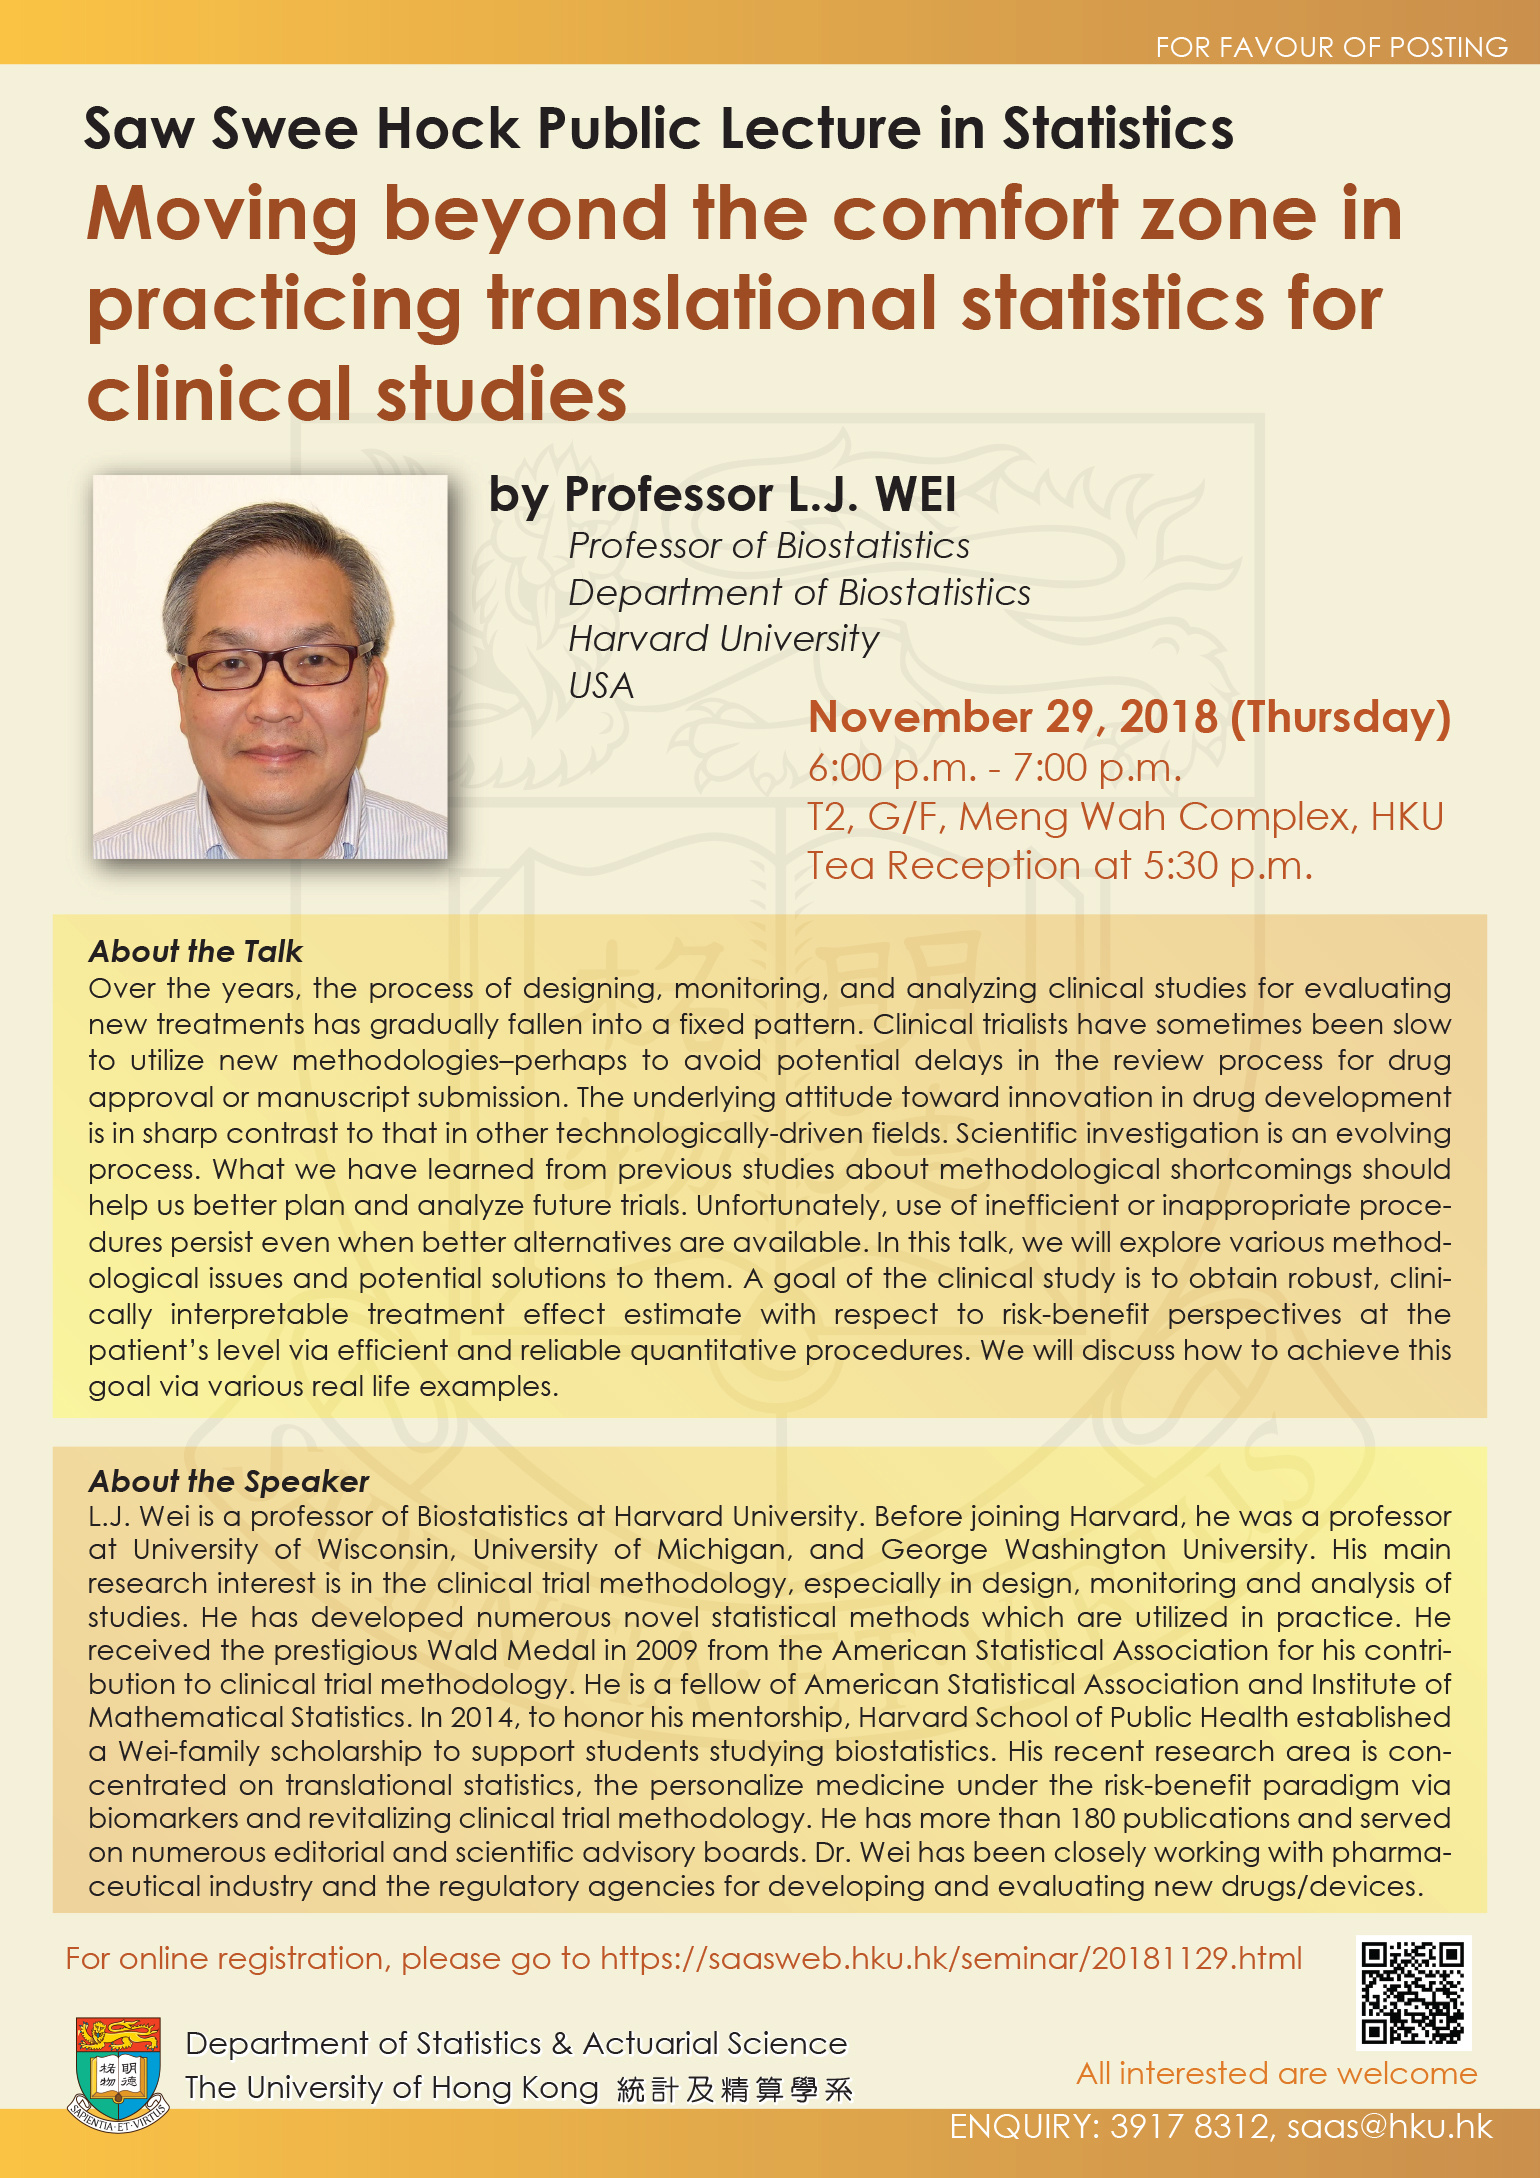  Saw Swee Hock Public Lecture in Statistics by Professor L.J. WEI on November 29, 2018